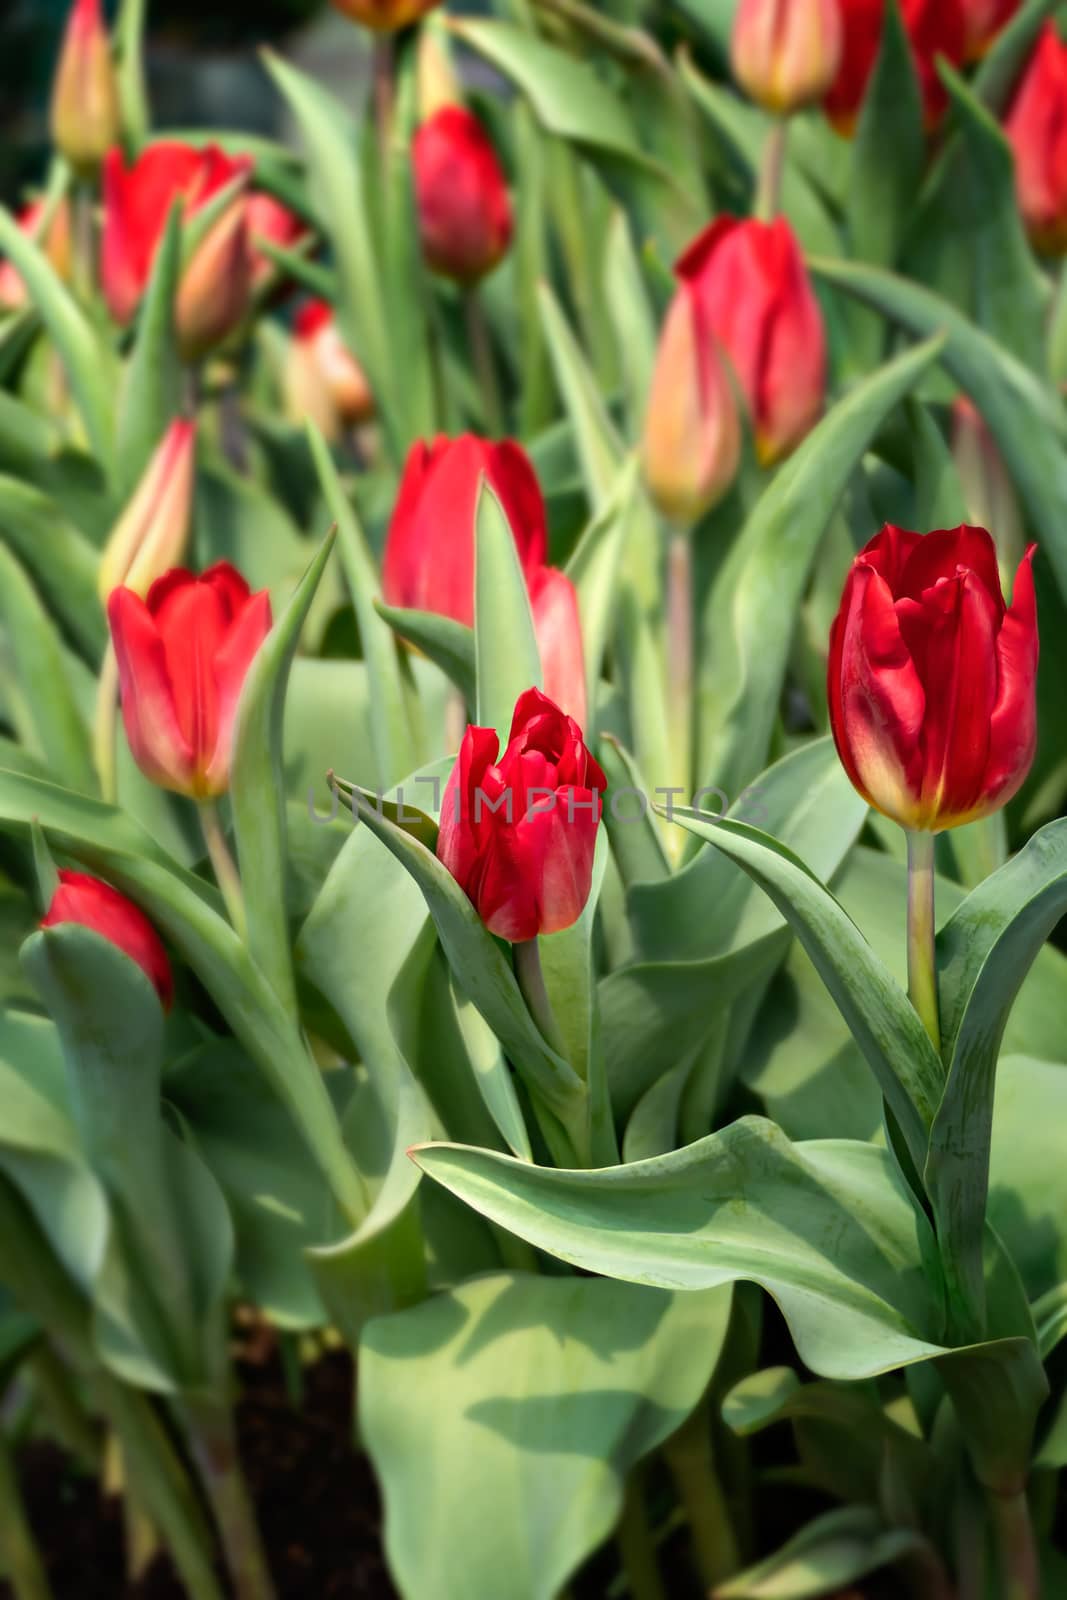 Beautiful red tulips flower with green leaves grown in garden